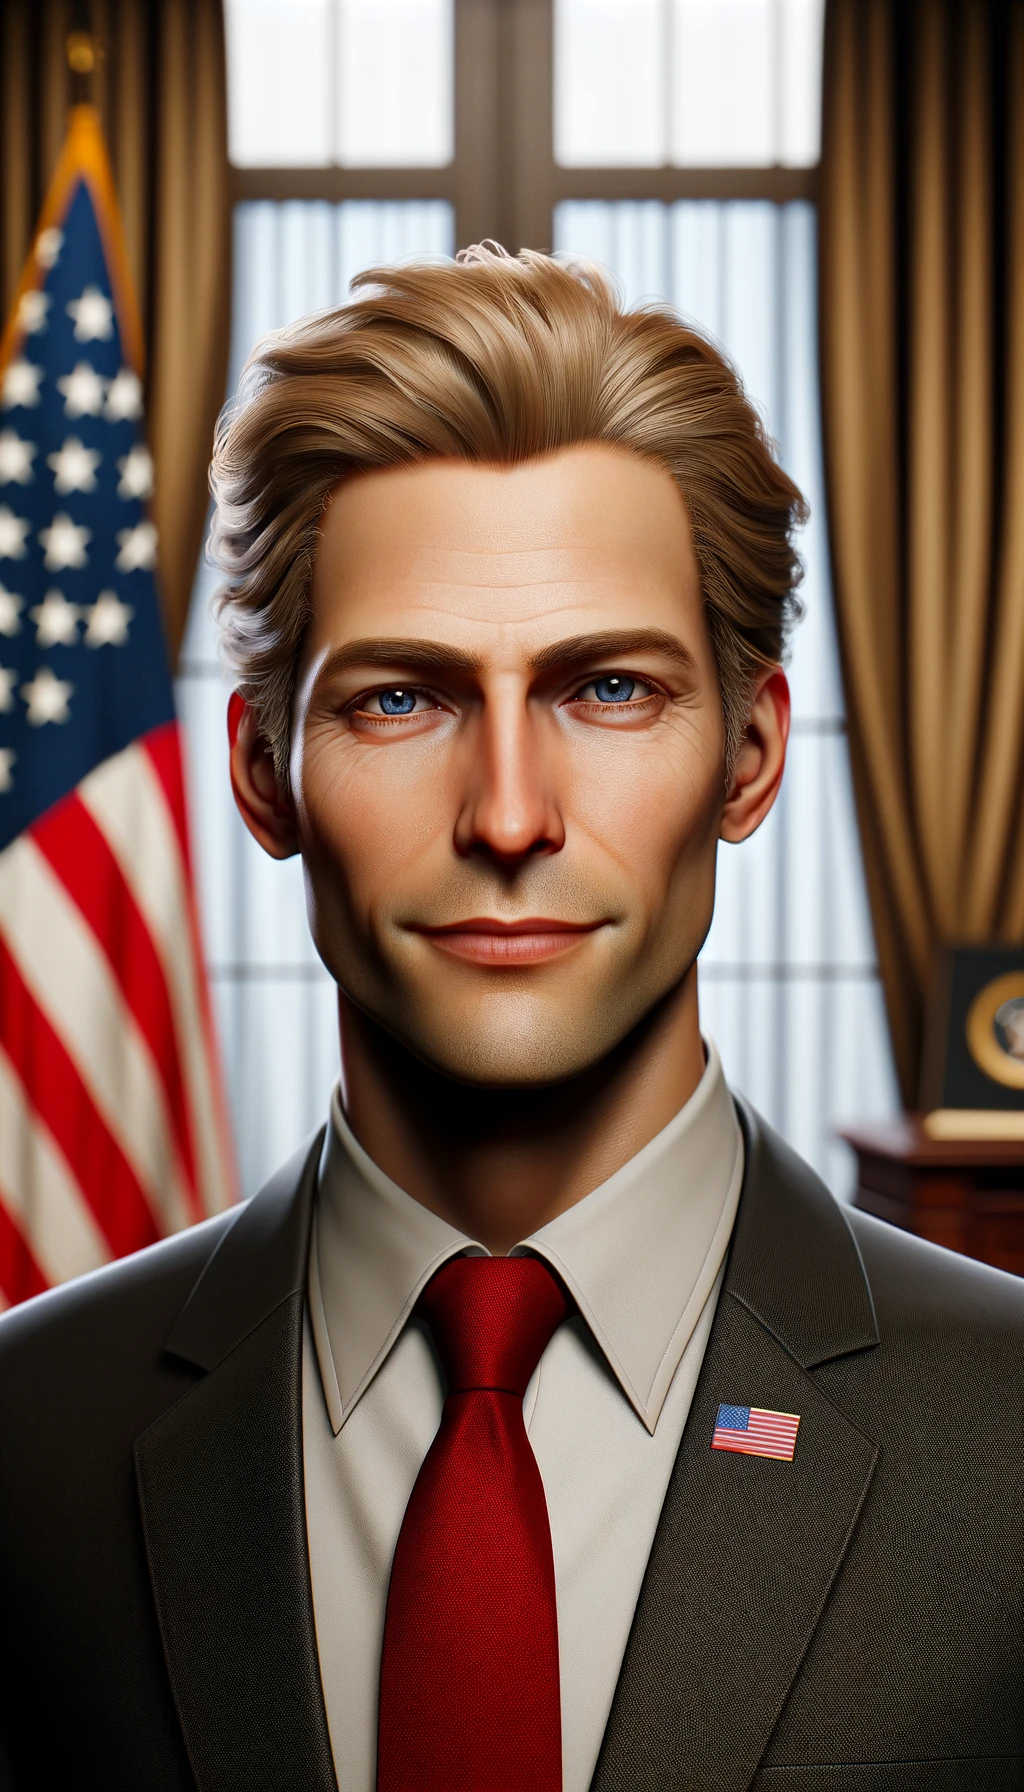 A middle-aged Caucasian male politician with light skin and distinctive blonde hair / Generated by DALL-E